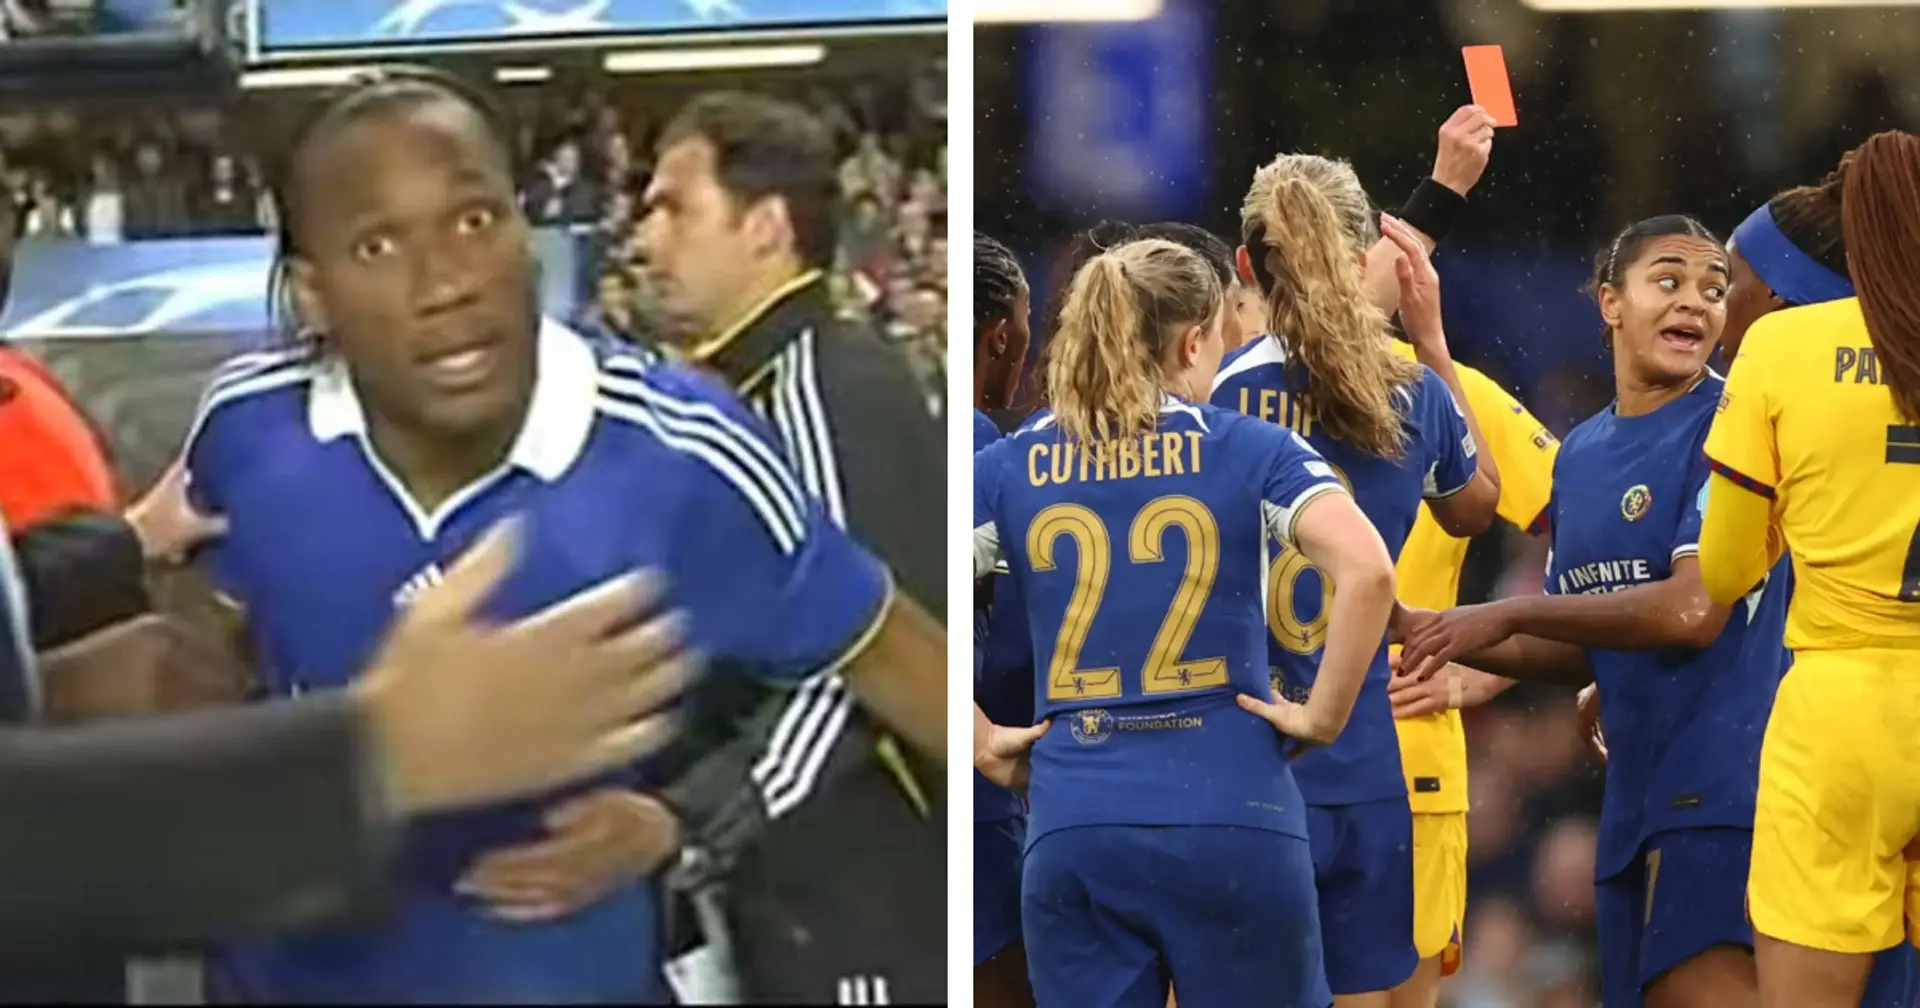 Drogba GIF trending again: Chelsea Women exit Champions League after controversial refereeing vs Barca